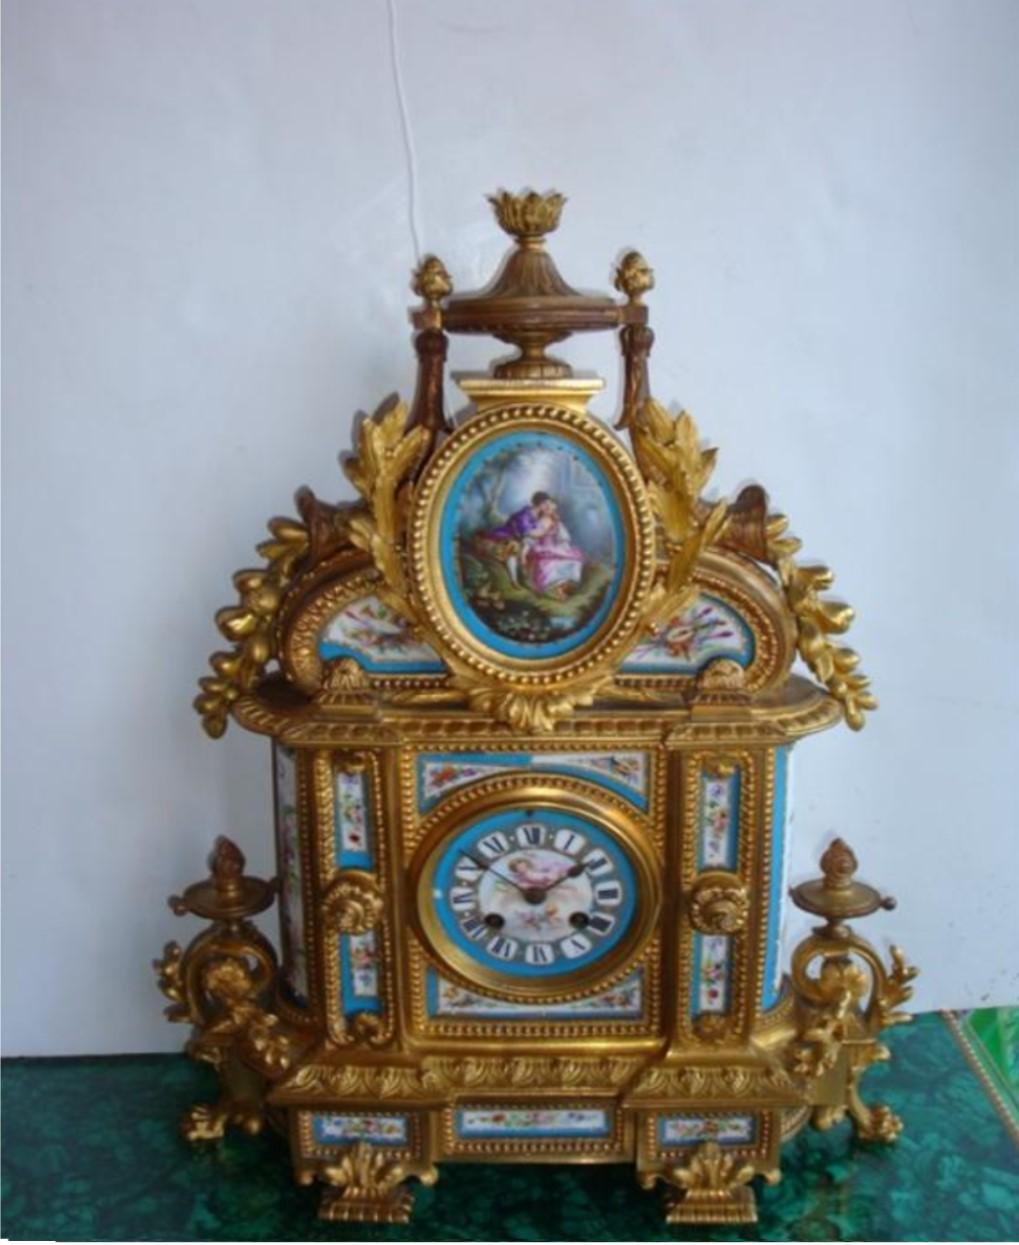 The Following Item we are offering is A Rare Ormolu-Mounted Sevres Turquoise Ground Mantel Clock, Late 19th Century, Iron-Red 1245 to the Plaques, the movement stamped JAPY FRERES & CO. , MED. (AILLE) D'HONN (EUR), MF & F, 2371 AND 15...3, the